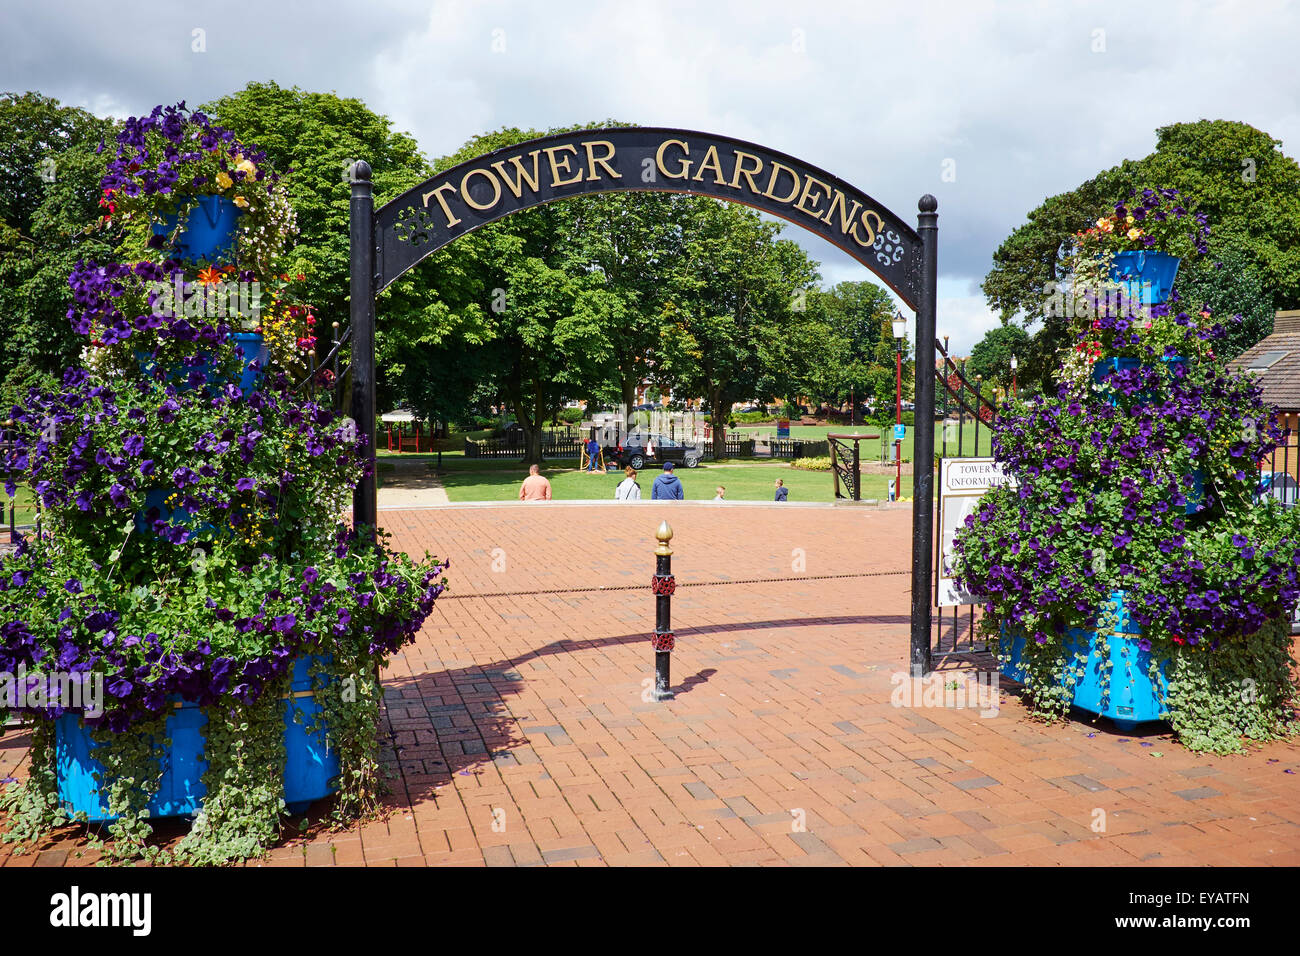 Entrance To Tower Gardens Grand Parade Skegness Lincolnshire UK Stock Photo